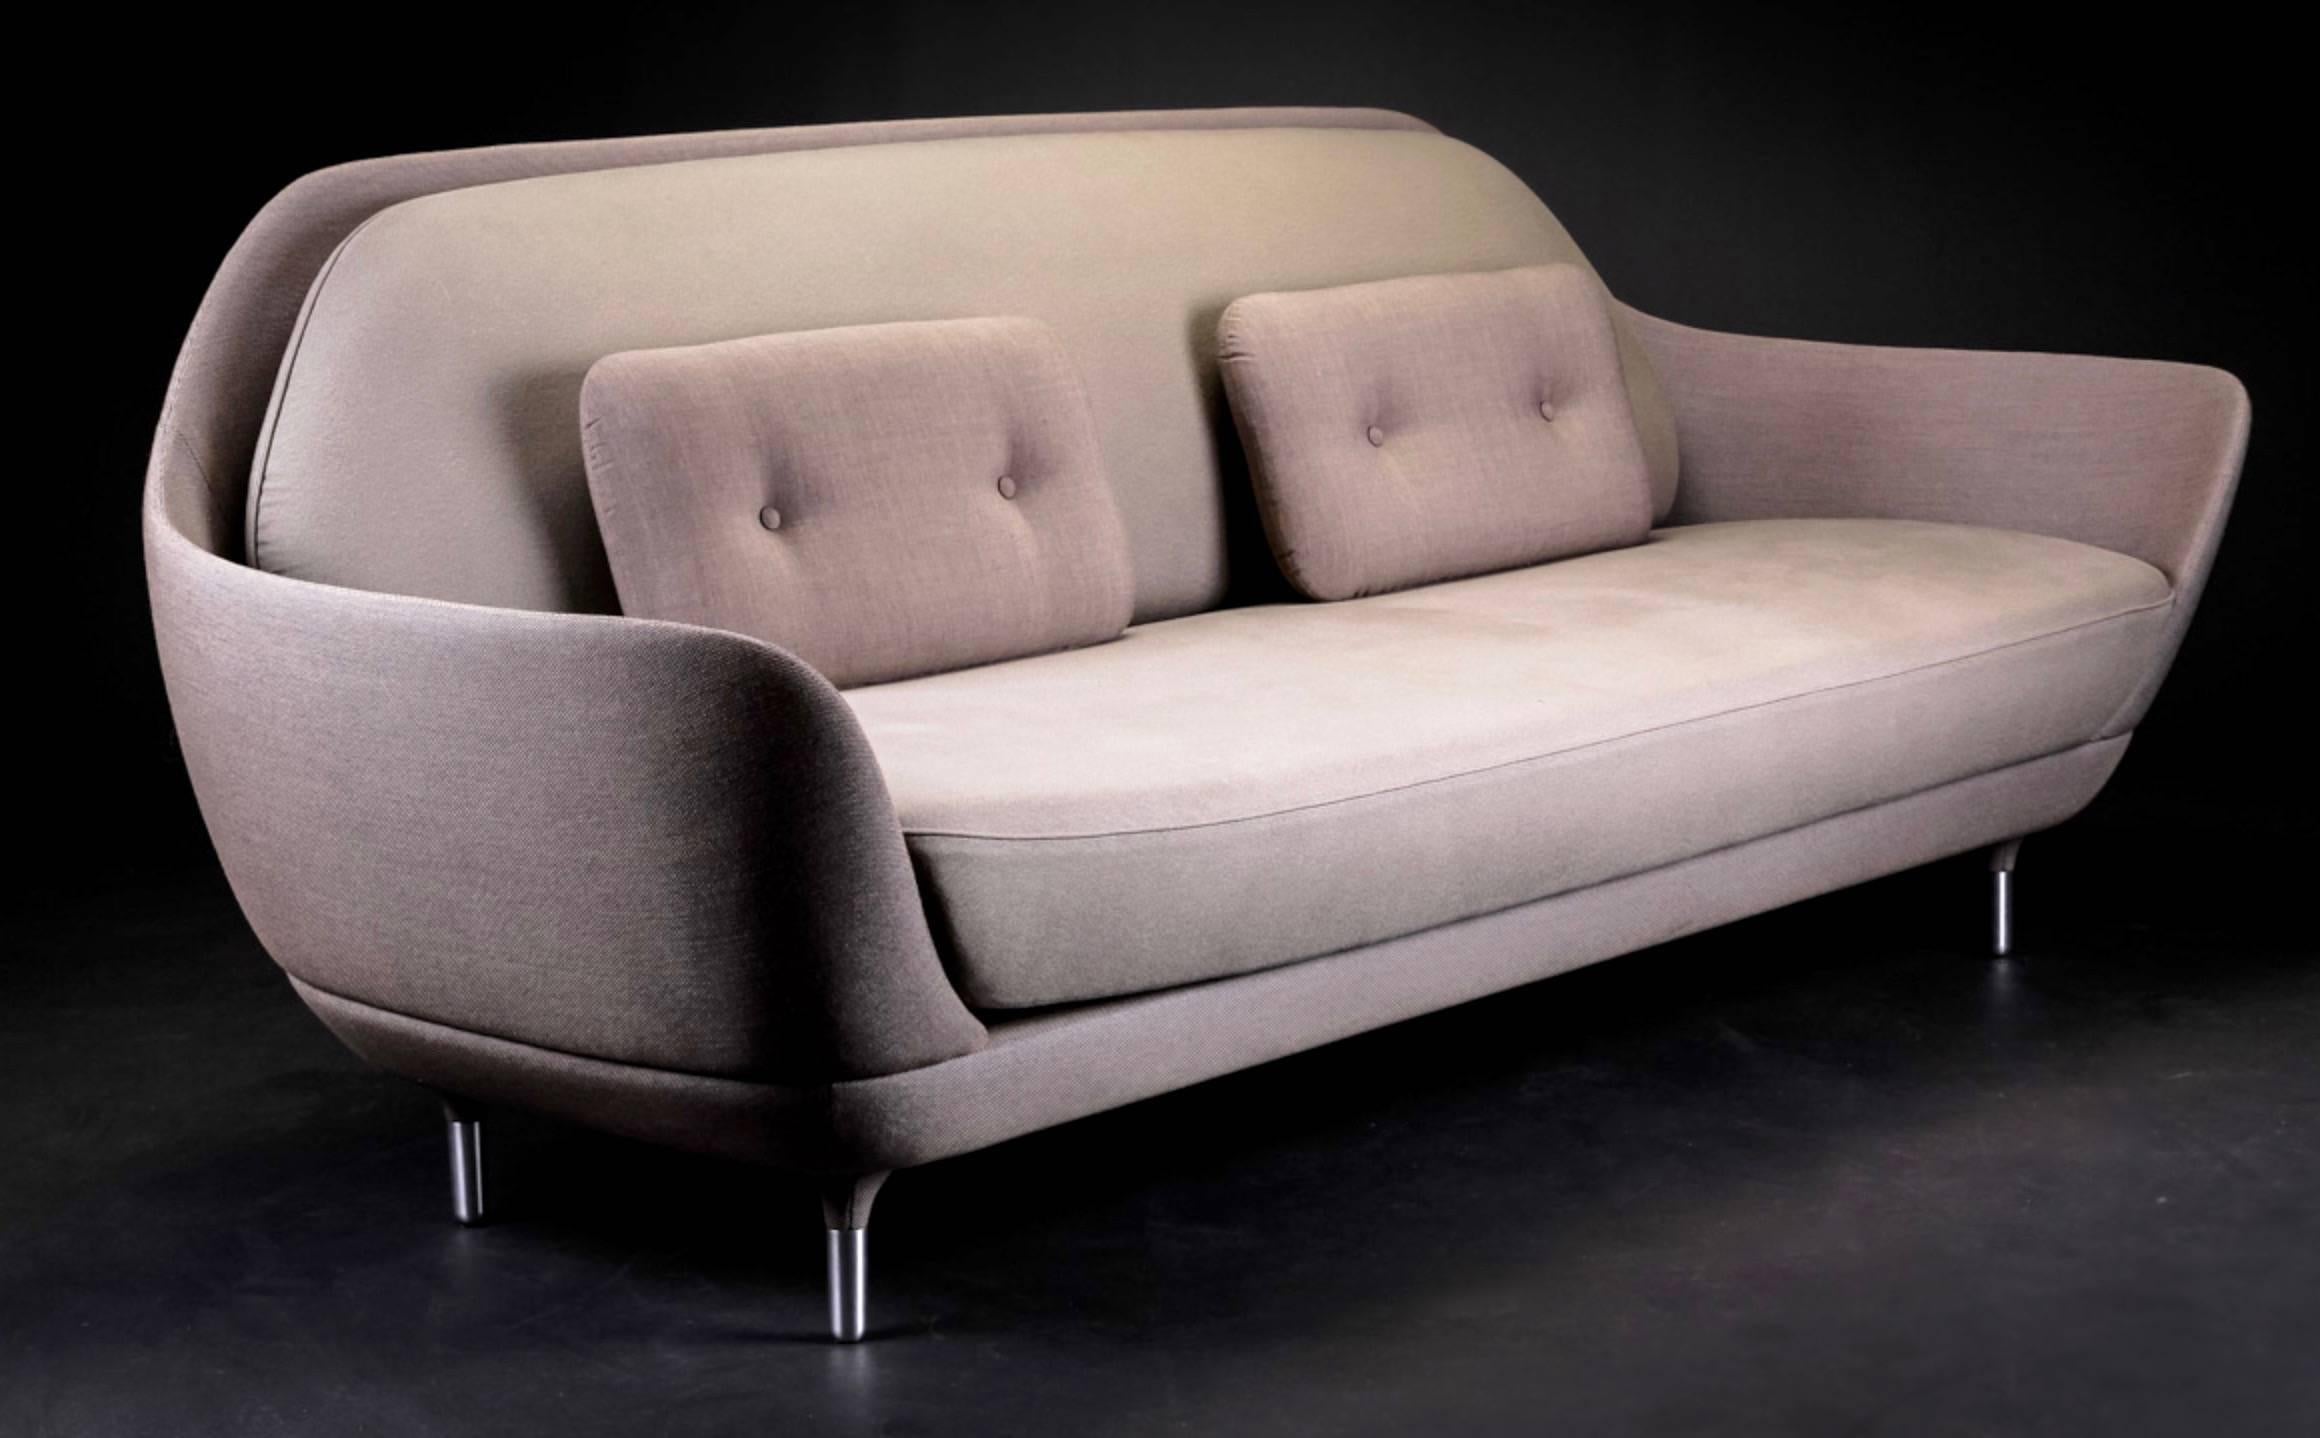 Meaning "to embrace" in Danish, the favn three-seat sofa is designed by Jaime Hayón. Upholstered with light and dark grey fabrics. Loose cushions, brushed aluminium legs. Very comfortable and elegant sofa, interior cushioning made of